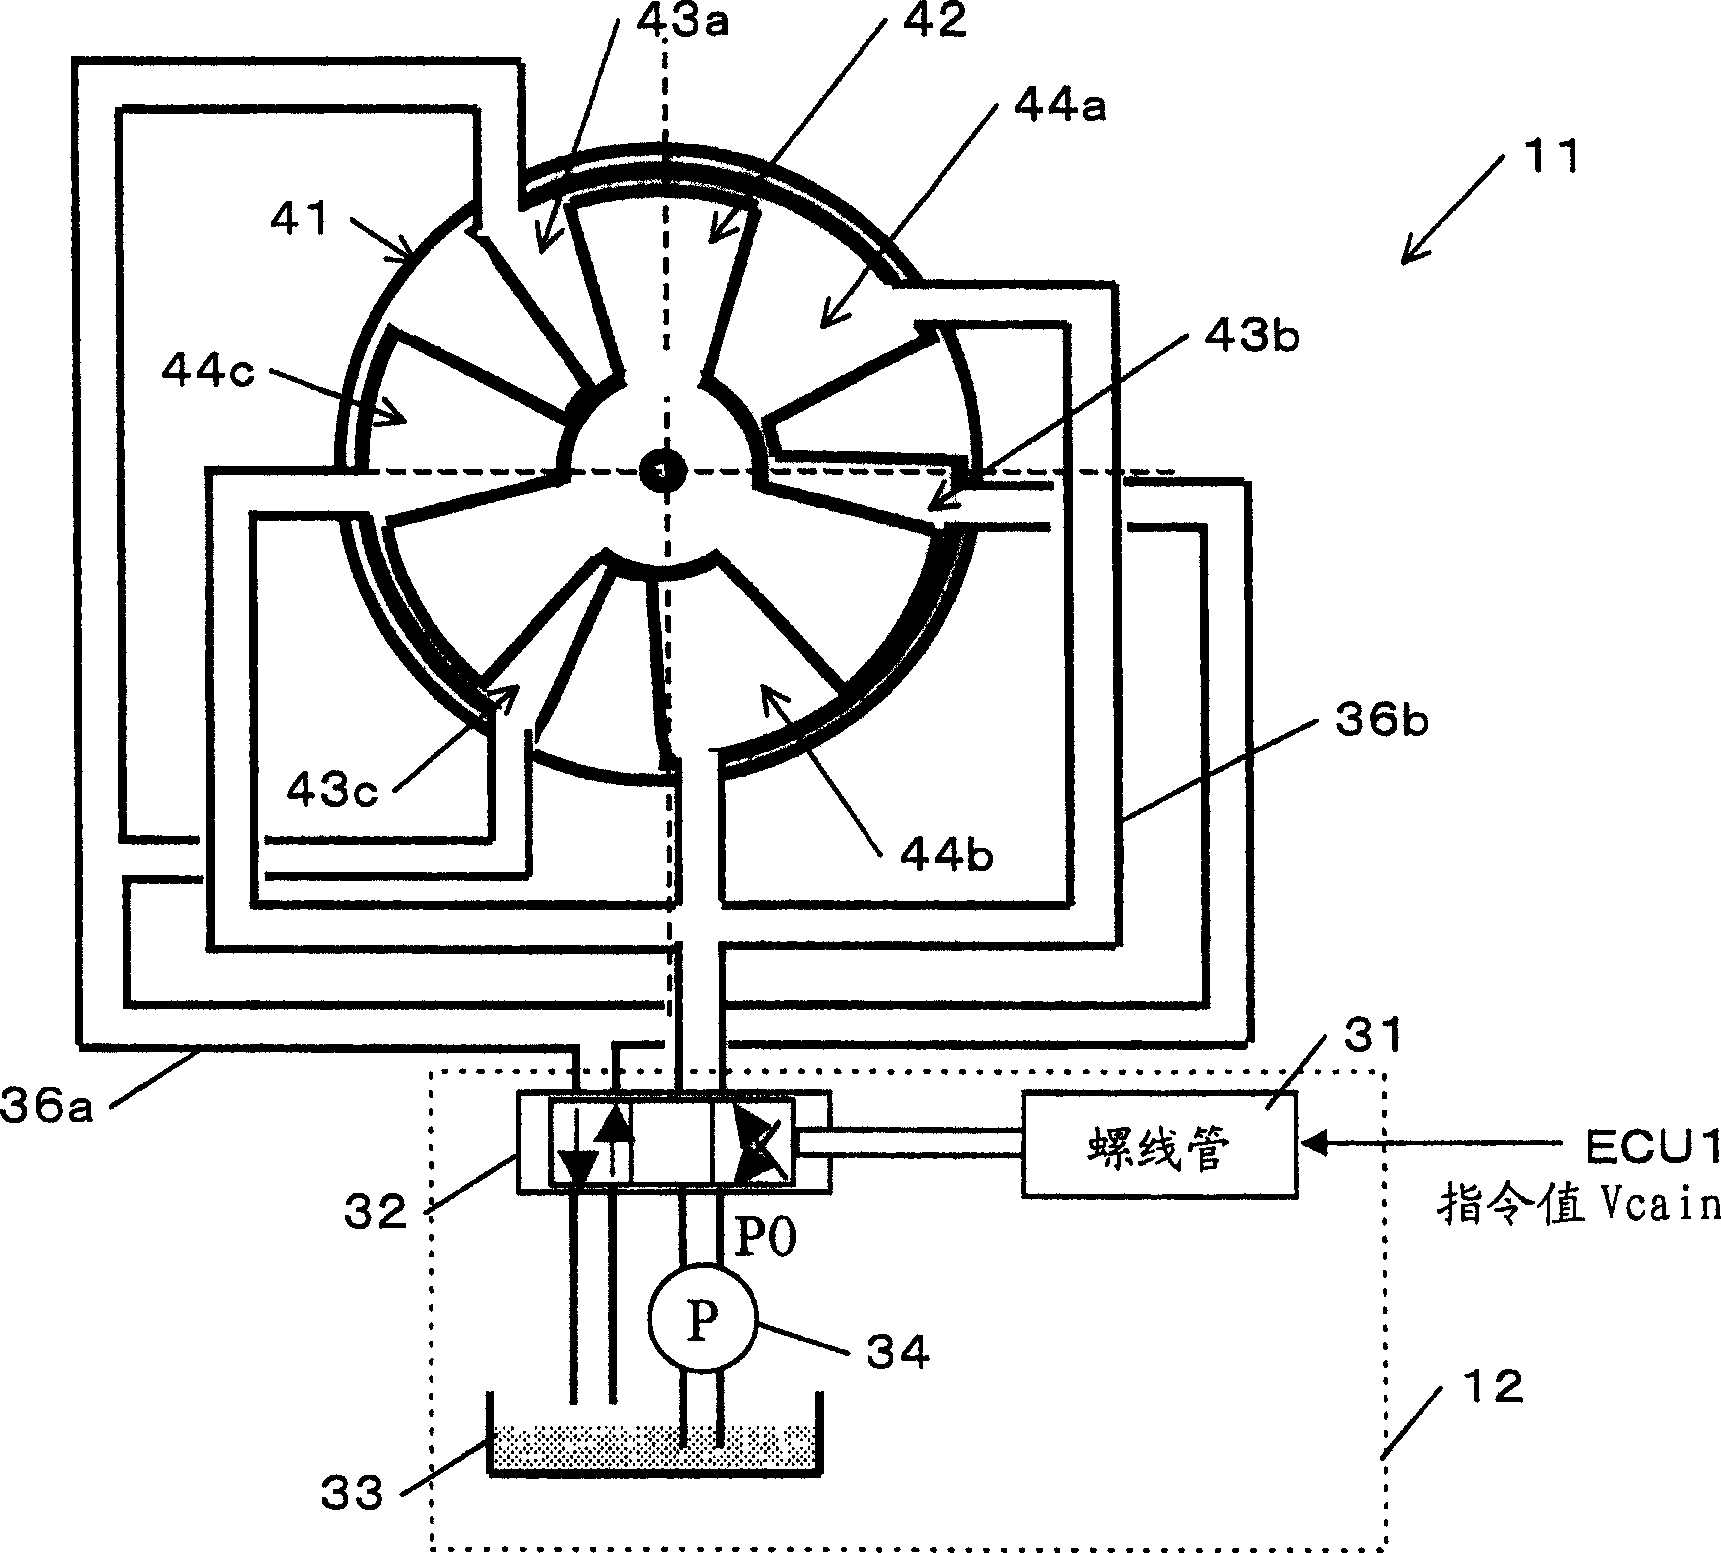 A control apparatus for controlling a plant by using a delta-sigma modulation algorithm